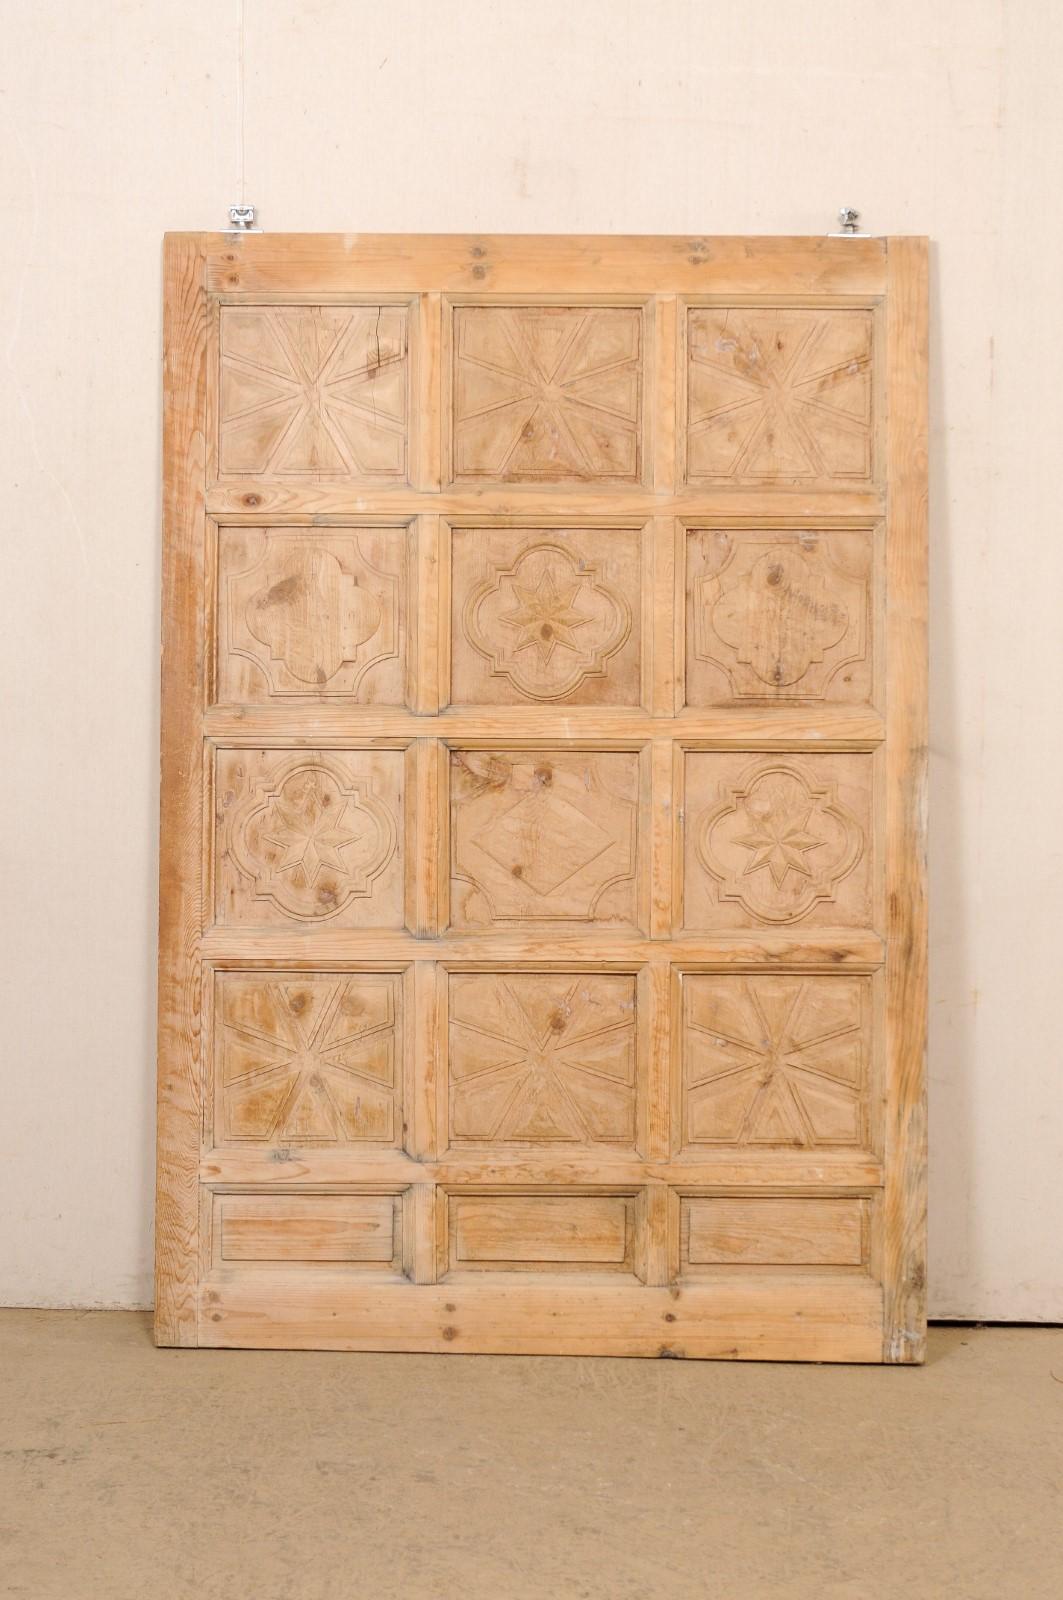 A Spanish large-size, decoratively-carved, raised-panel wooden door. This vintage wood door from Spain is adorn with 15 raised panels, with three rows of panels across and five down. Each of the four top rows have a squared-shape with embellished